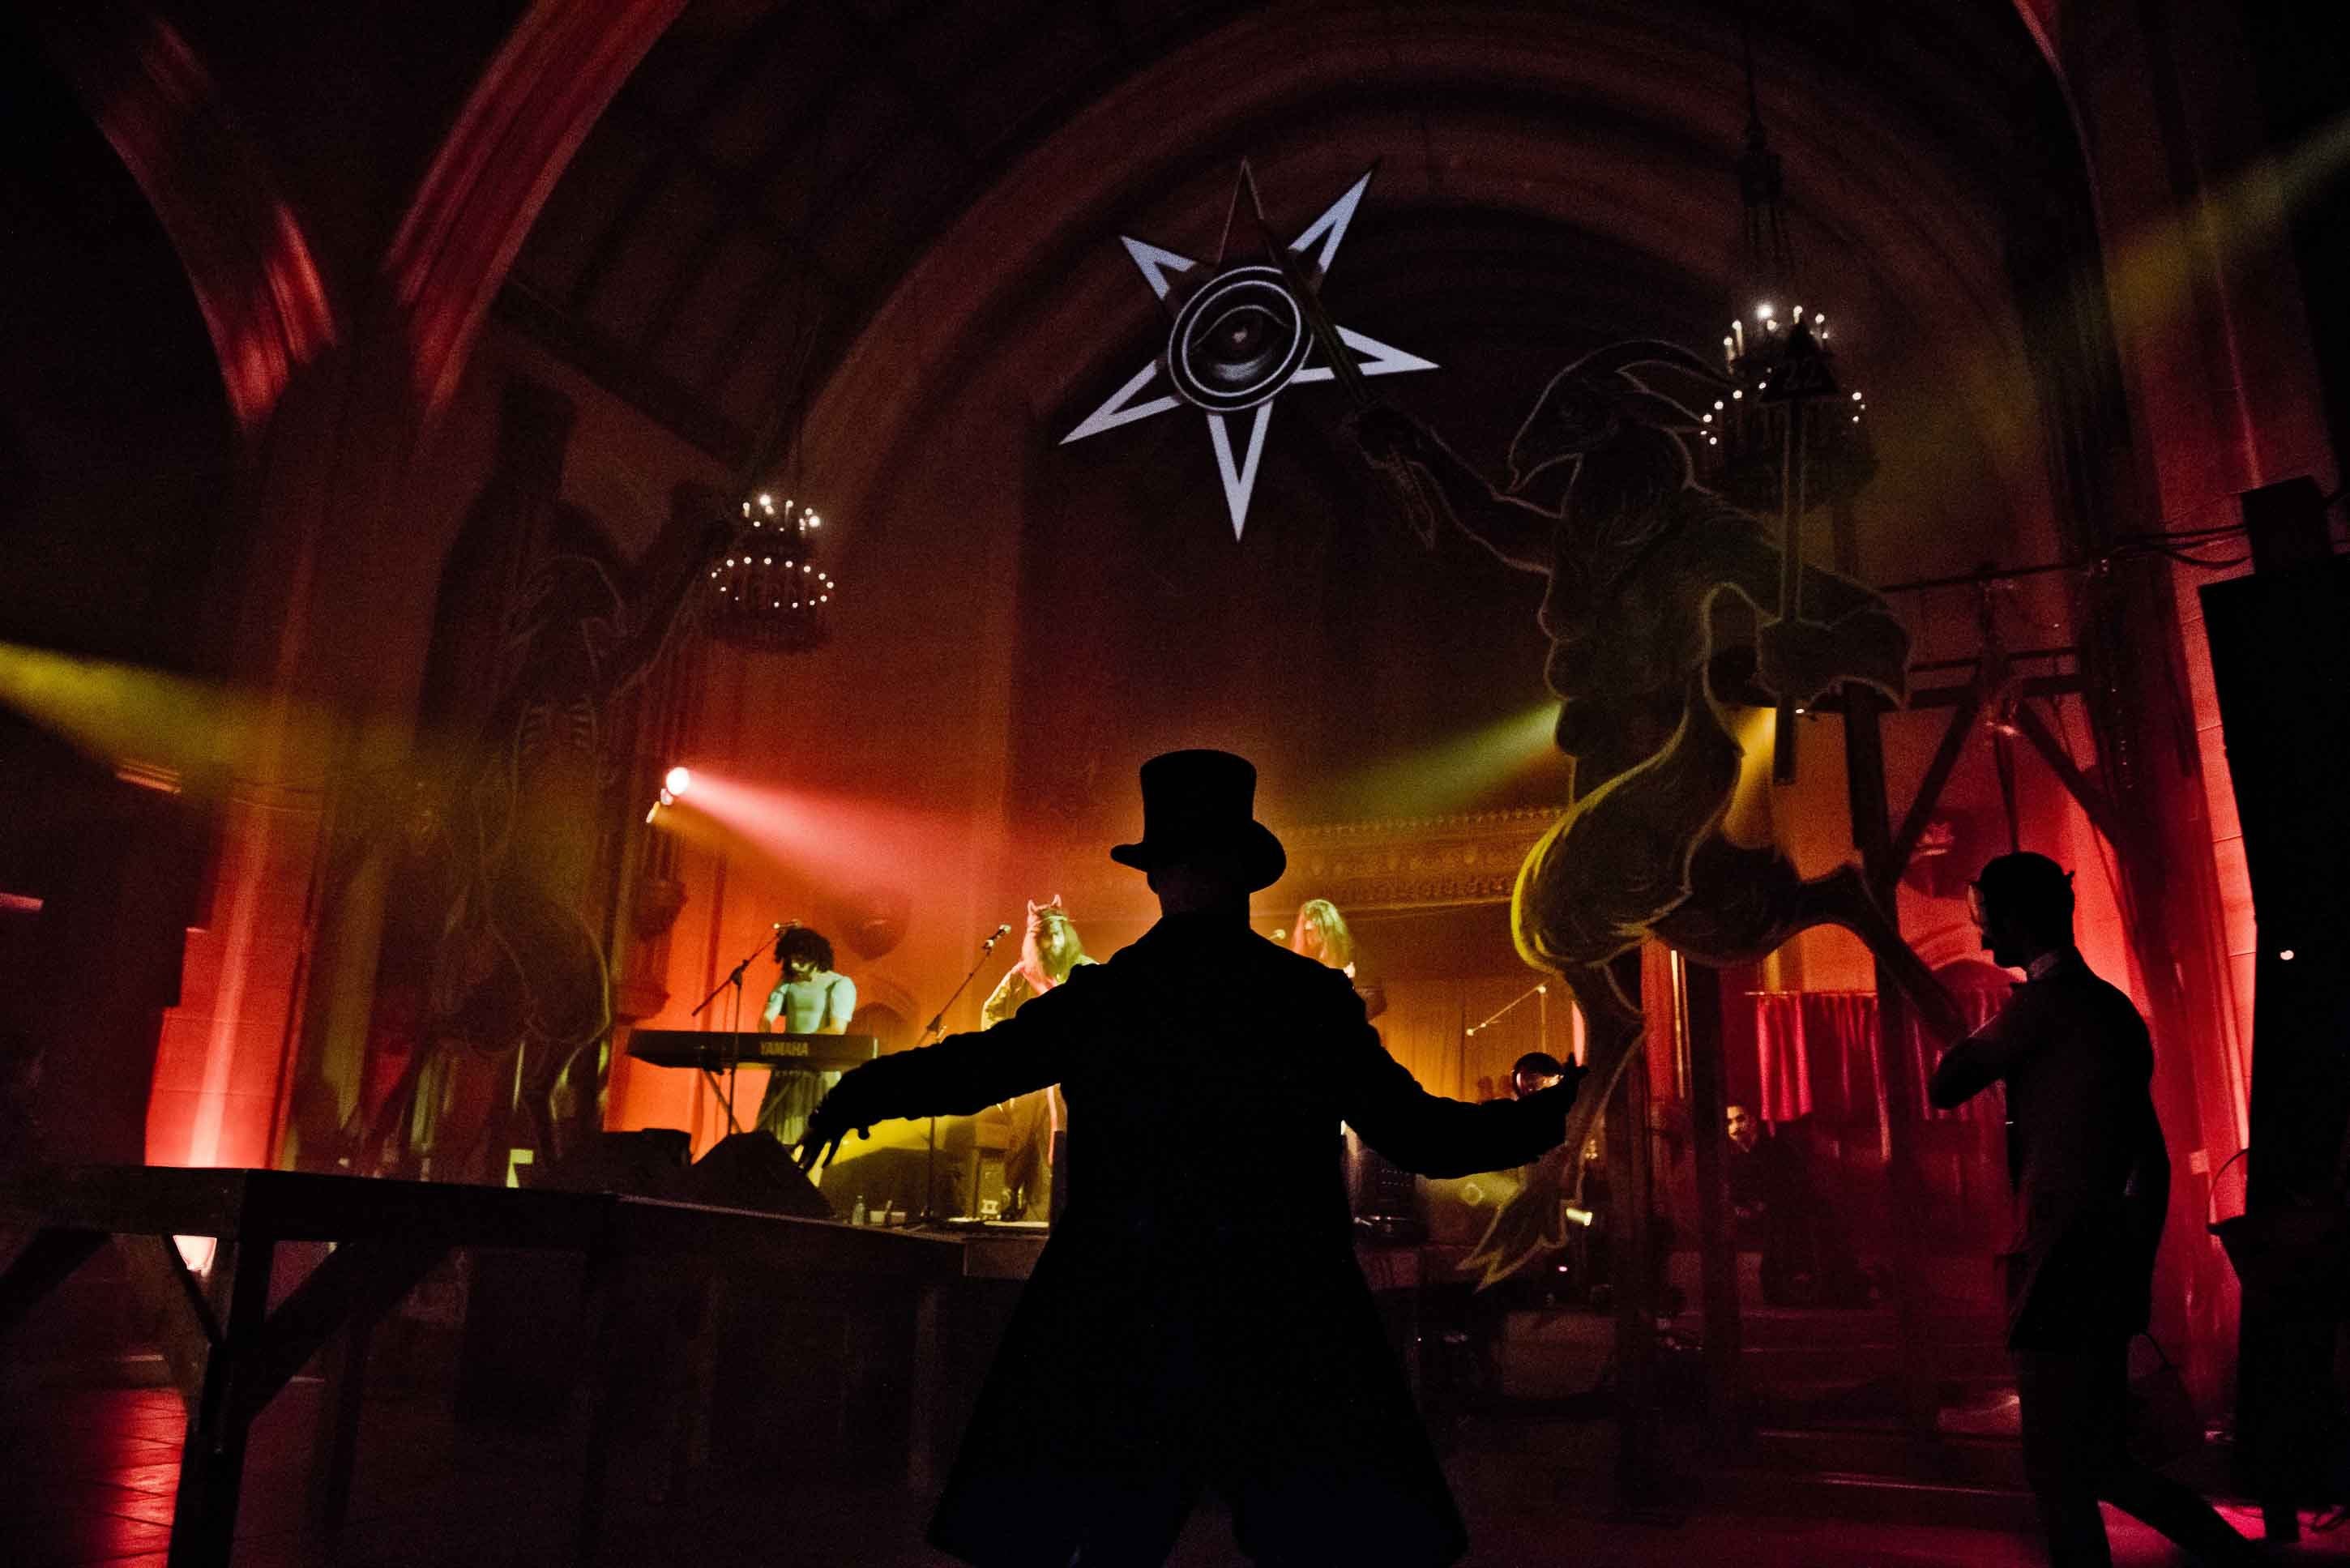 The Asylum room featured an elaborate stage setup during Theatre Bizarre 2017.